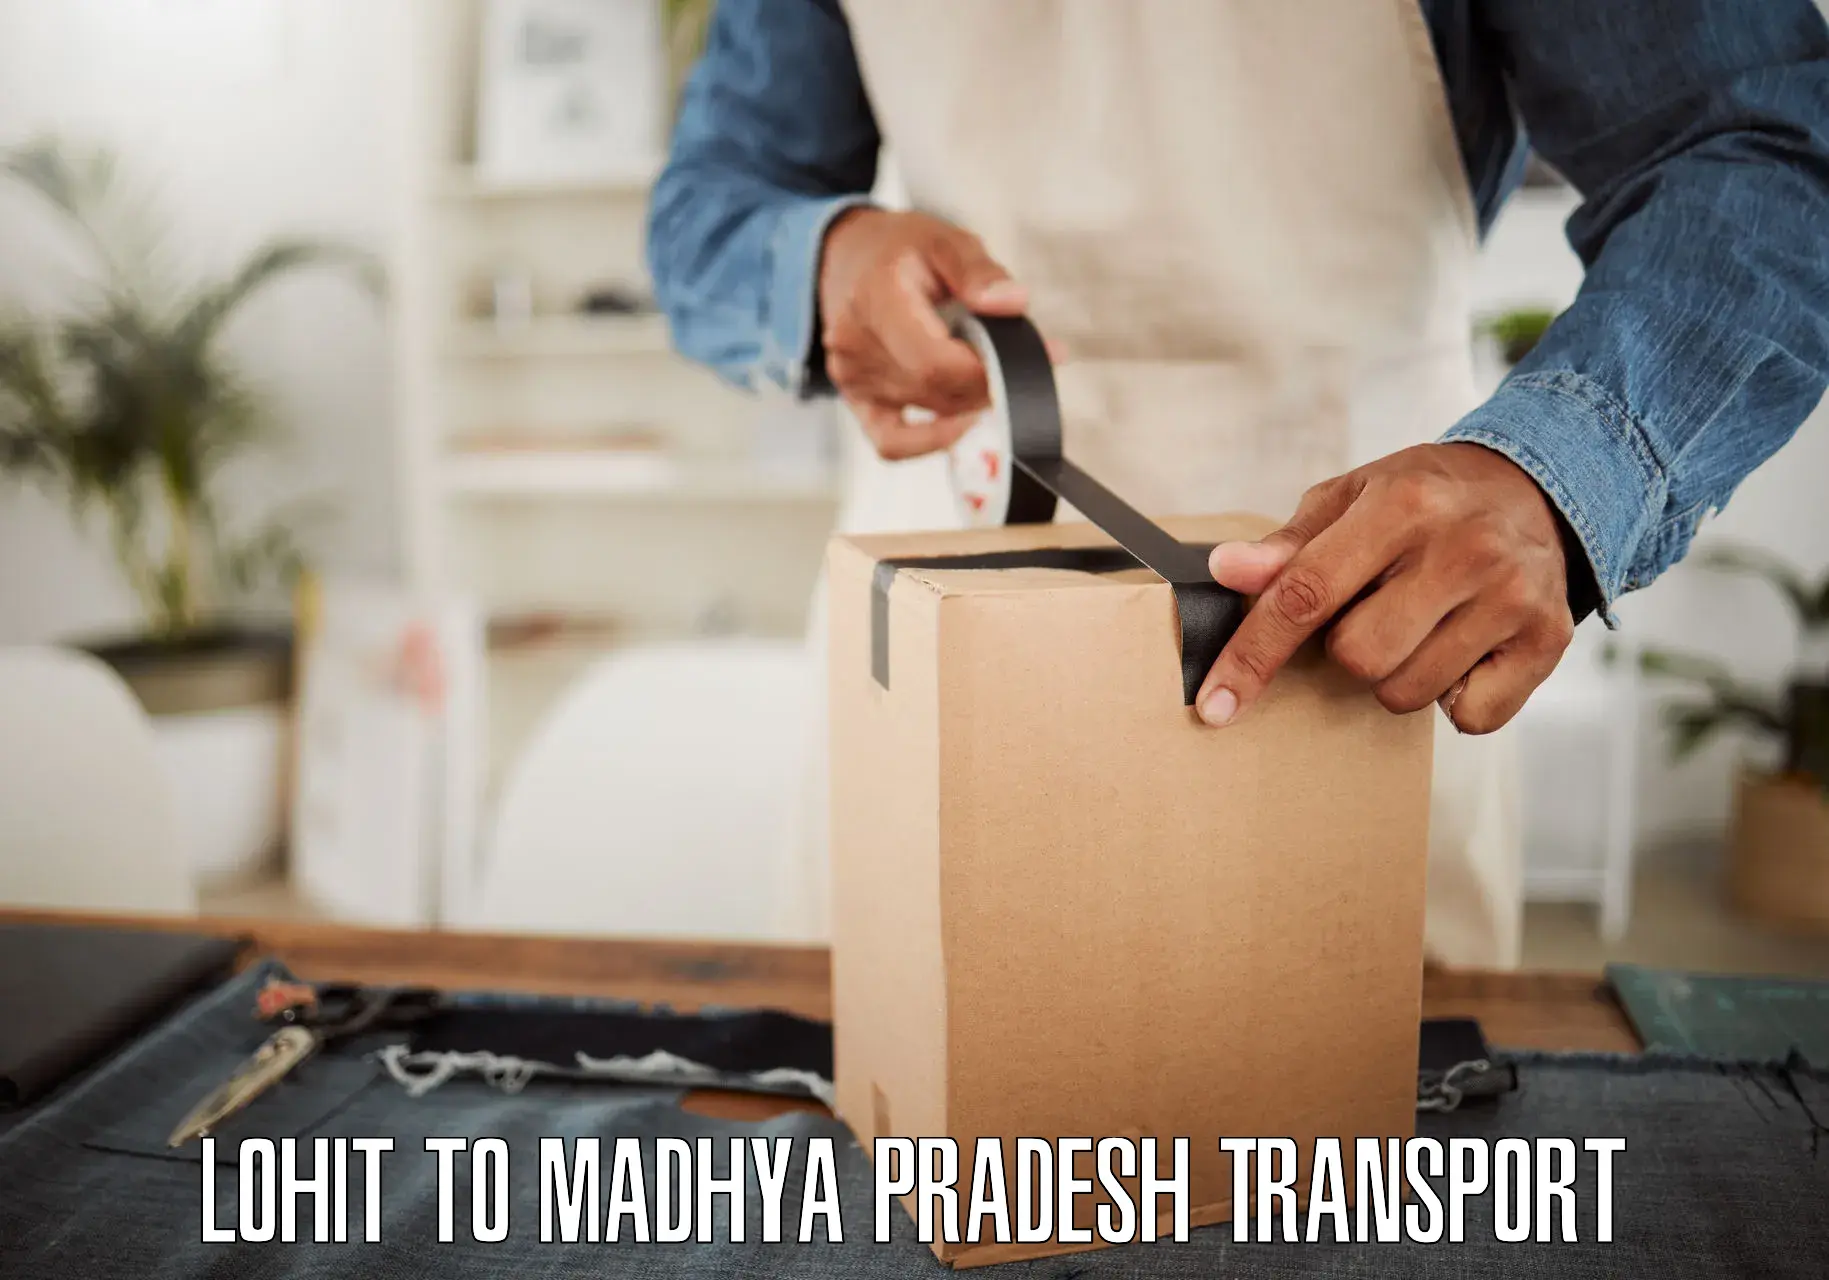 Truck transport companies in India Lohit to Madwas